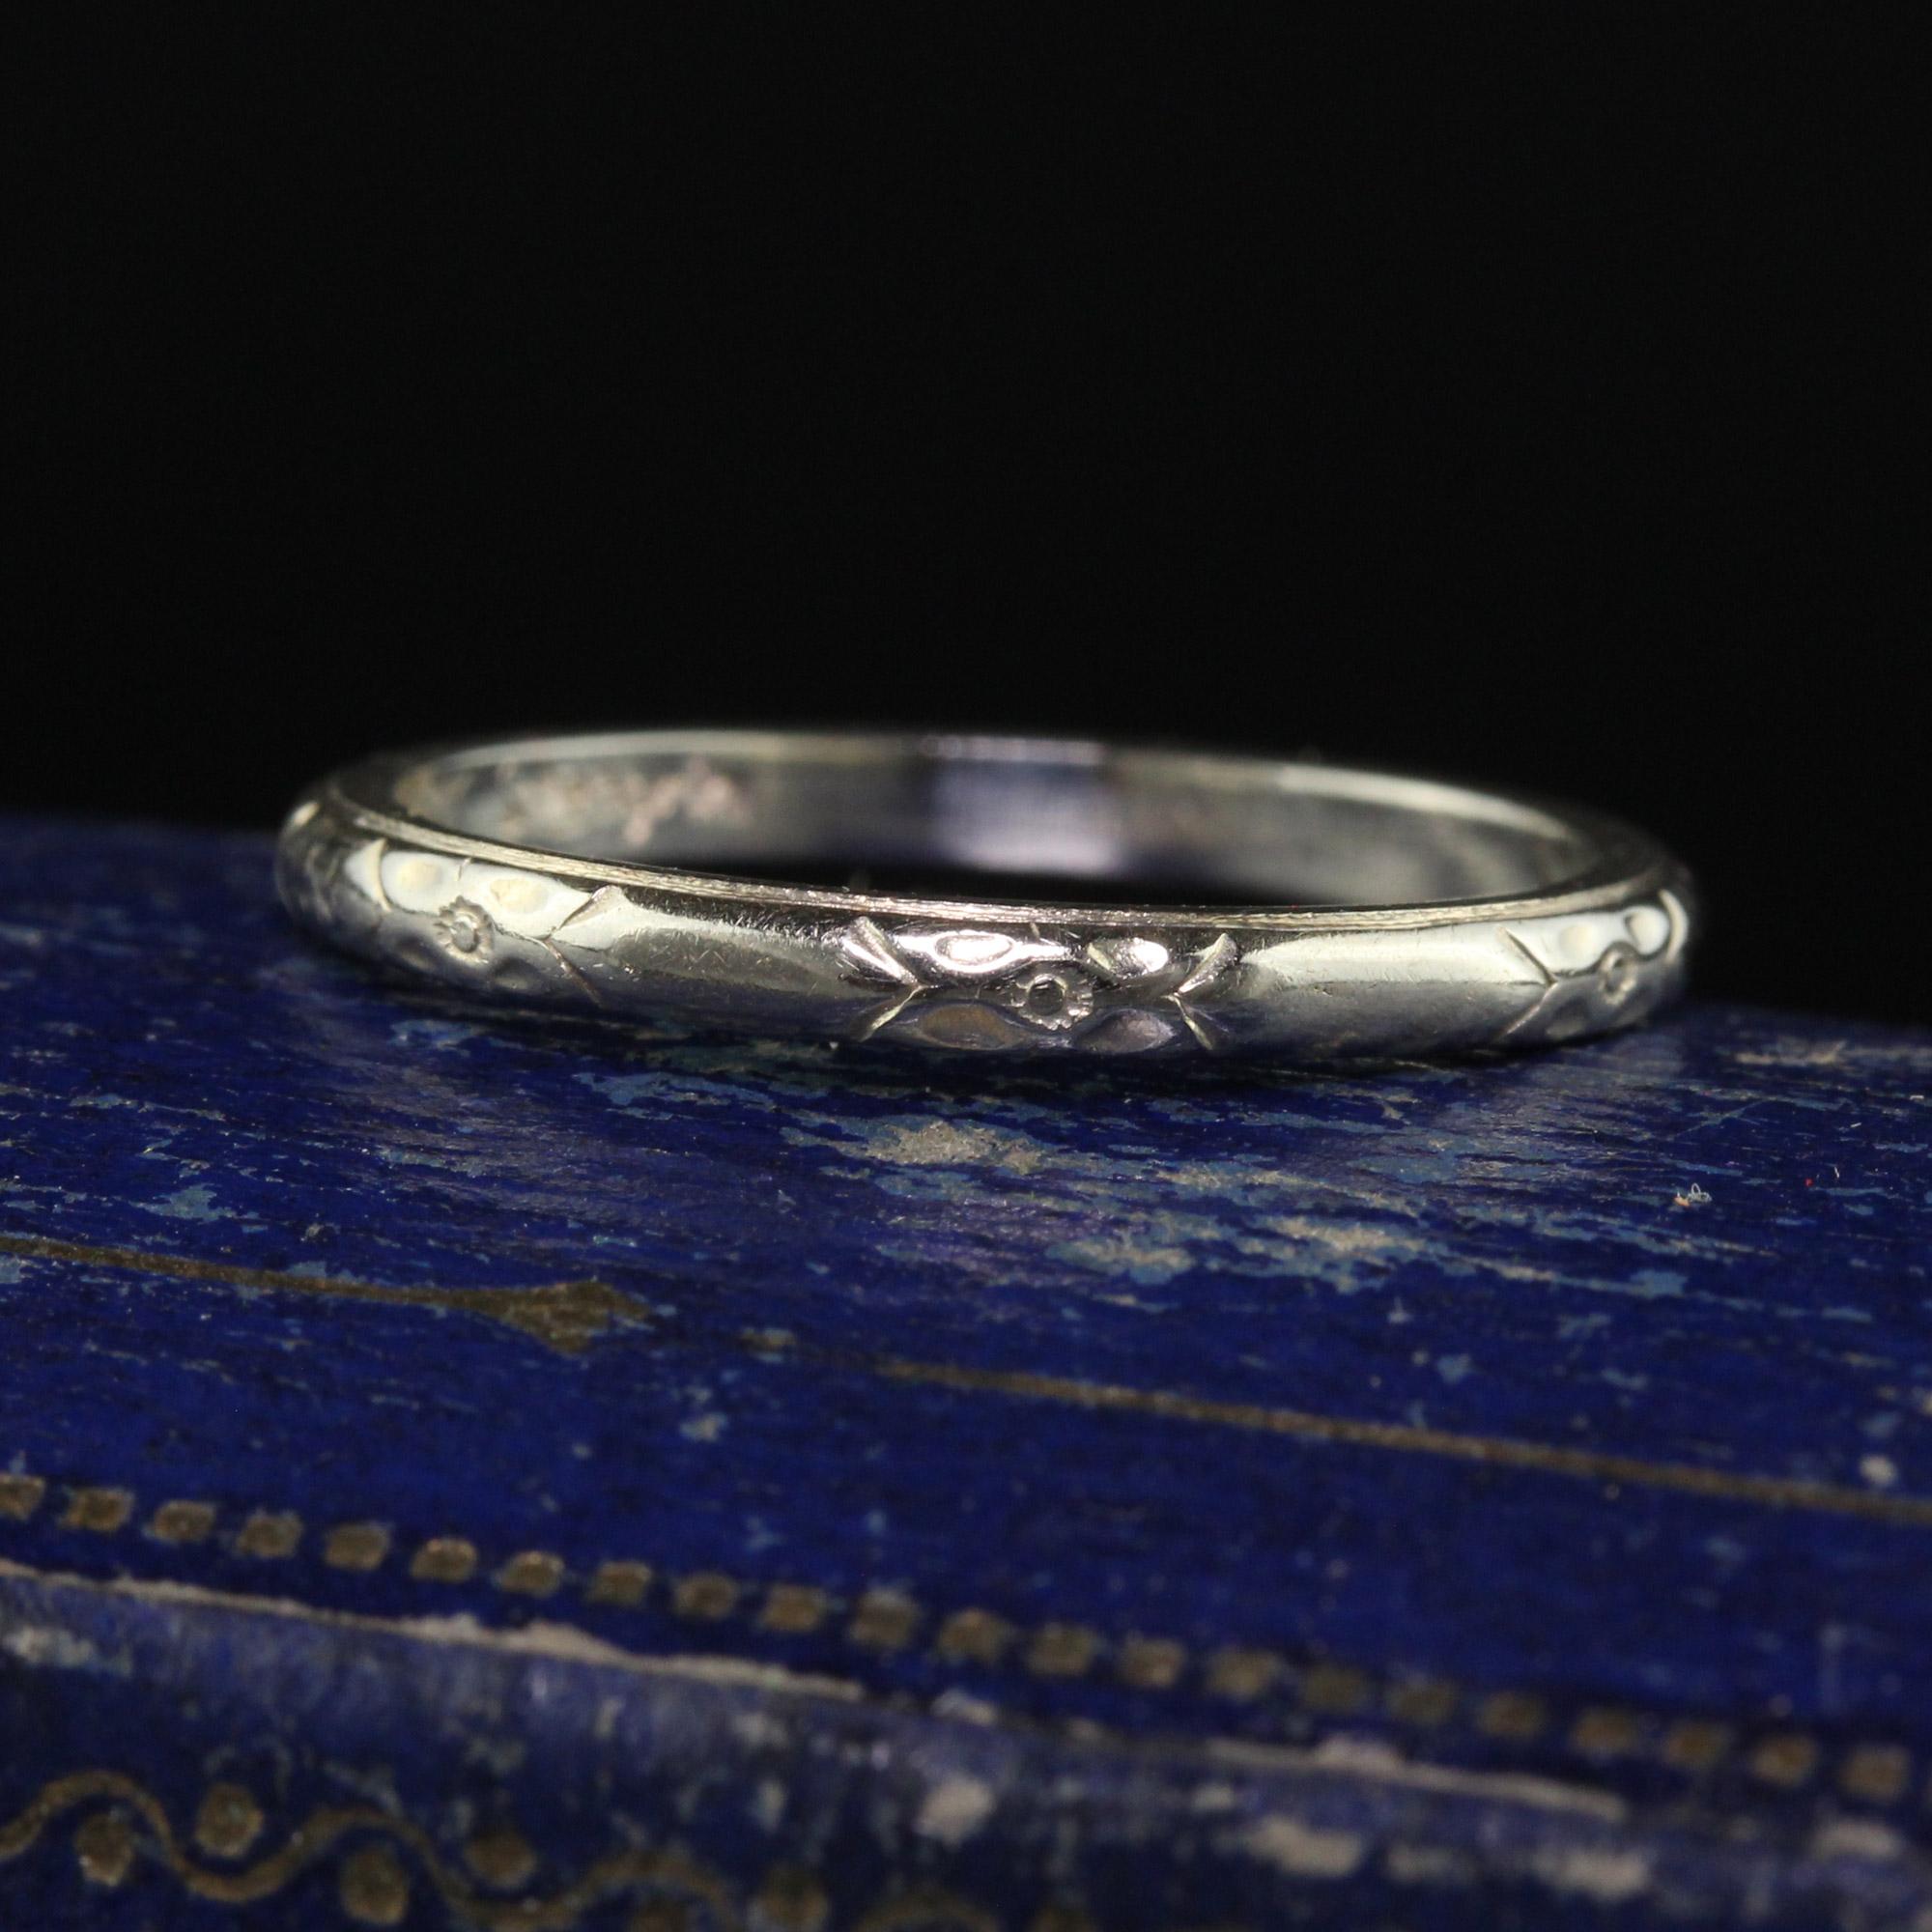 Beautiful Antique Art Deco Lohengrin 18K White Gold Engraved Wedding Band - Size 6. This beautiful wedding band is crafted in 18k white gold. The outside of the band is beautifully engraved around the entire ring and is in great condition. The ring